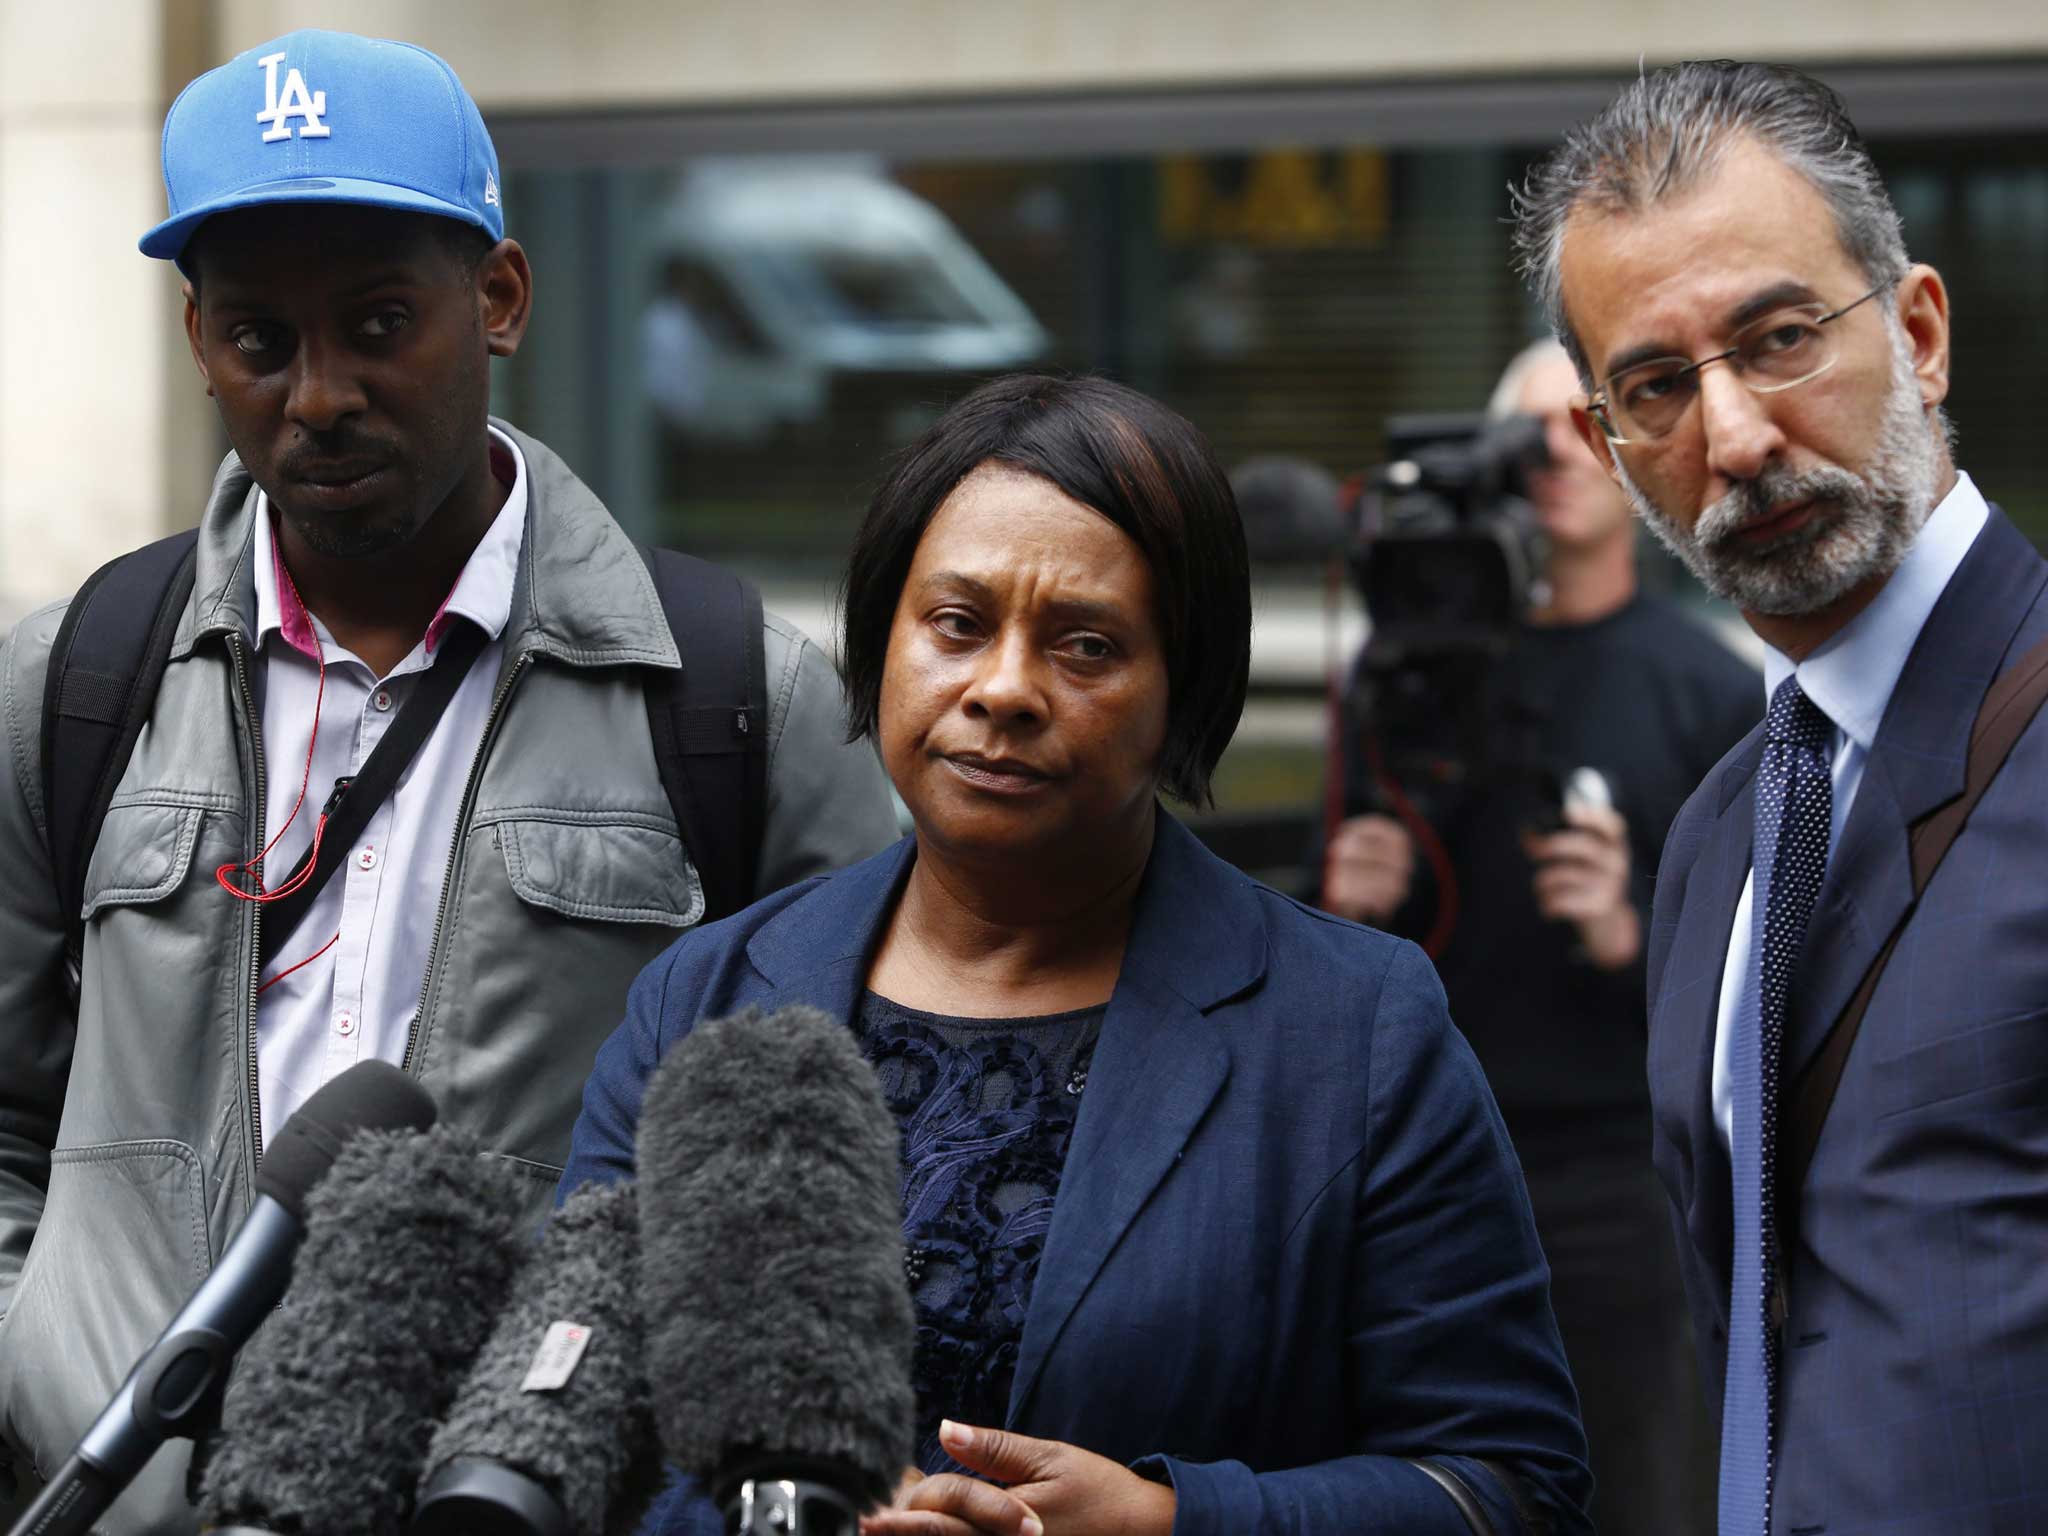 Doreen Lawrence is to meet the head of the Metropolitan Police to discuss smearing allegations